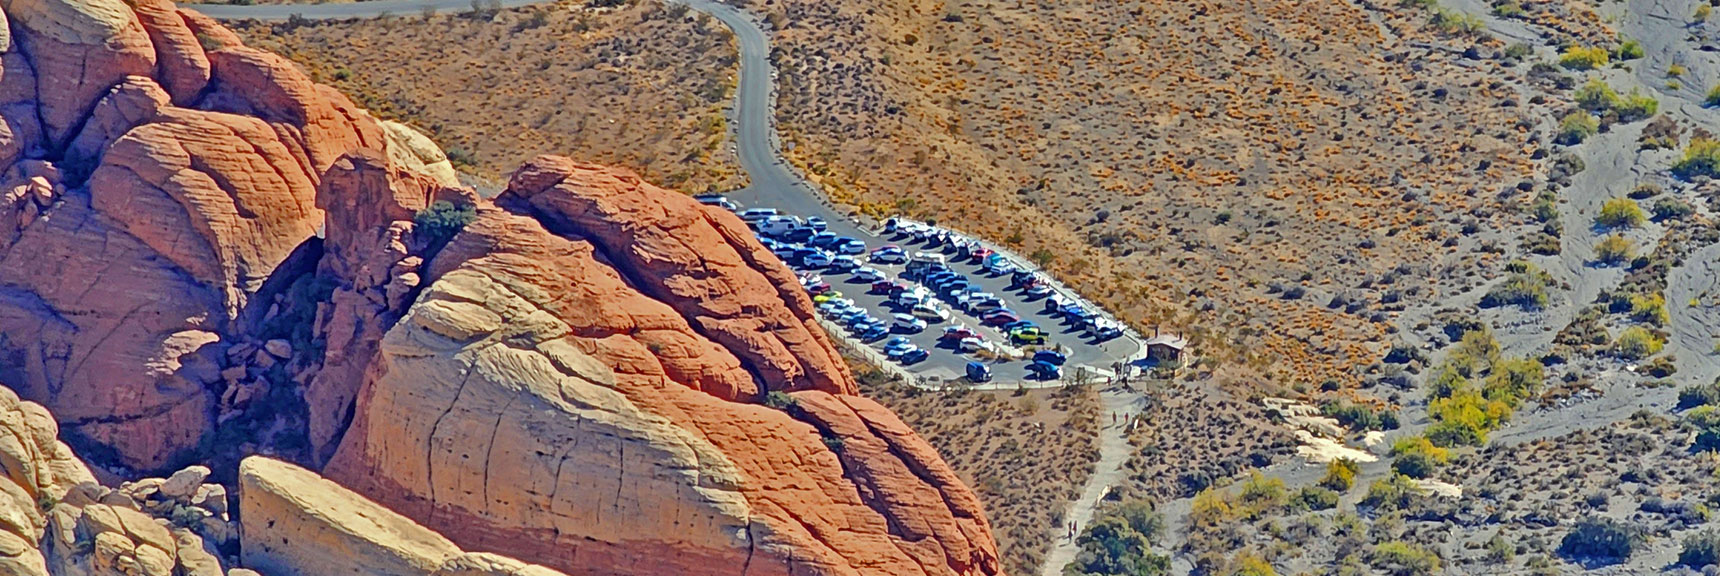 Sandstone Quarry Parking Area Almost Immediately Below. Last Car on Right is "The Beast" | Turtlehead Peak | Red Rock Canyon National Conservation Area, Nevada